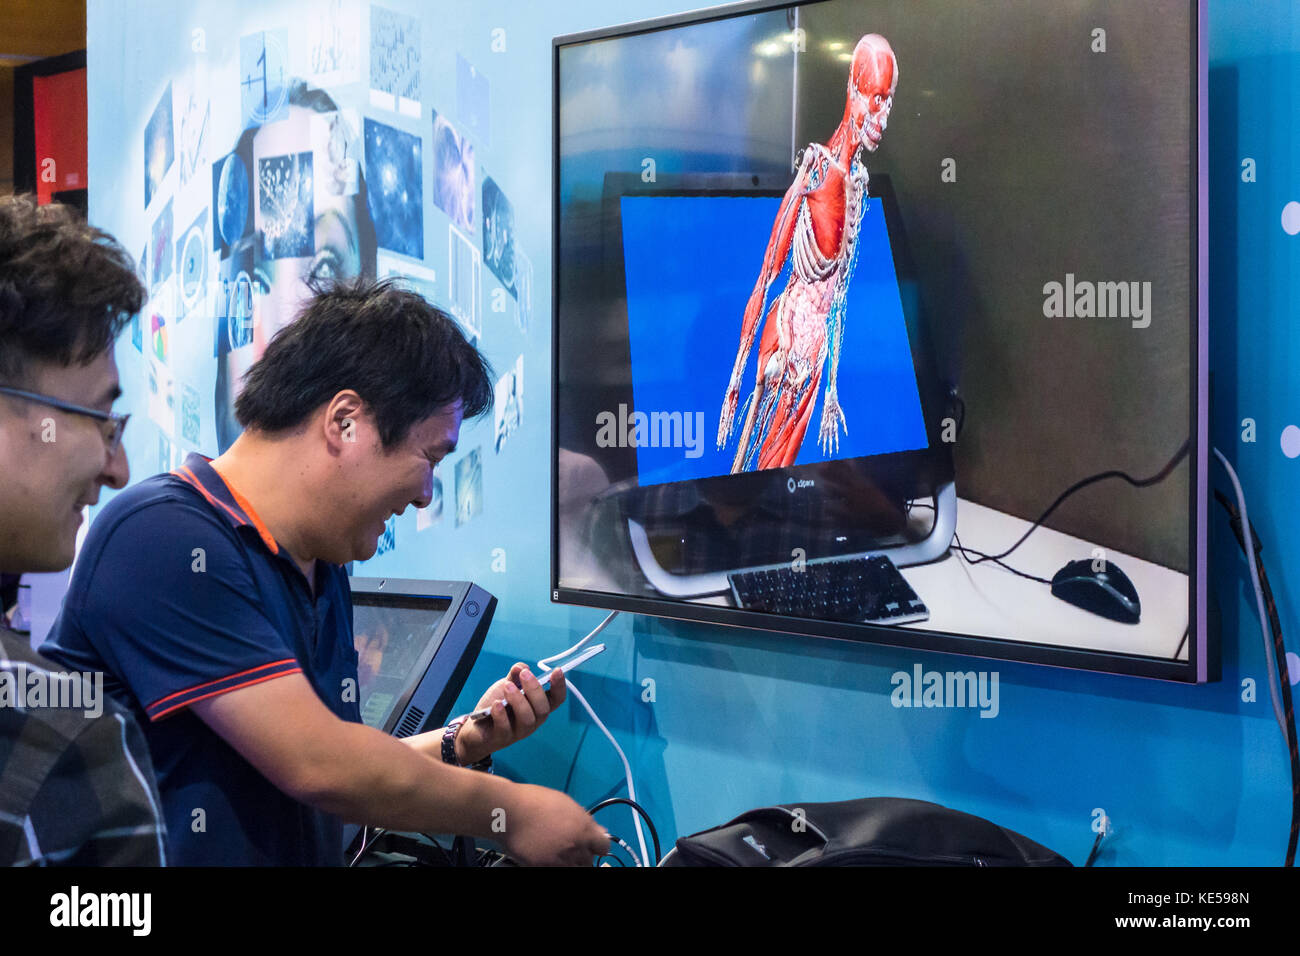 Medical AR augmented reality demo in Shenzhen, China Stock Photo